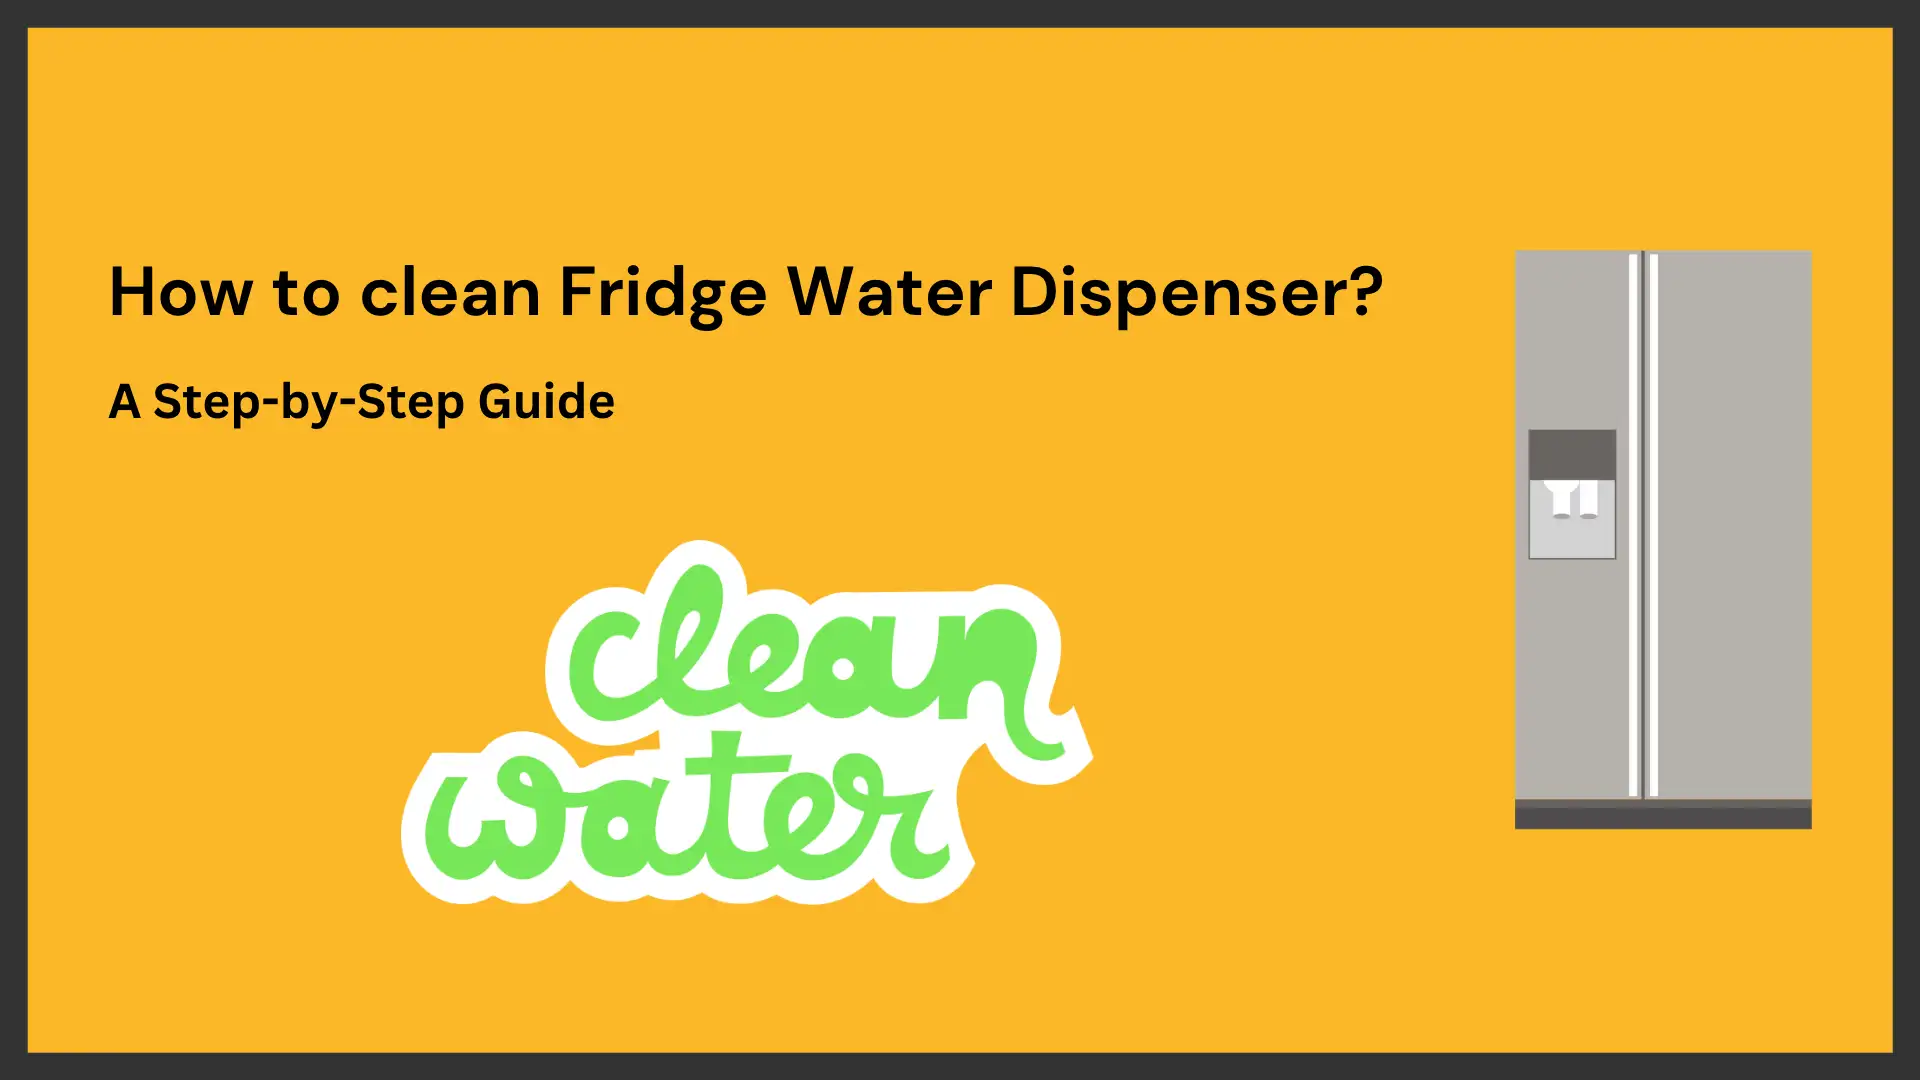 How to clean Fridge Water Dispenser thoroughly; A Step-by-Step Guide